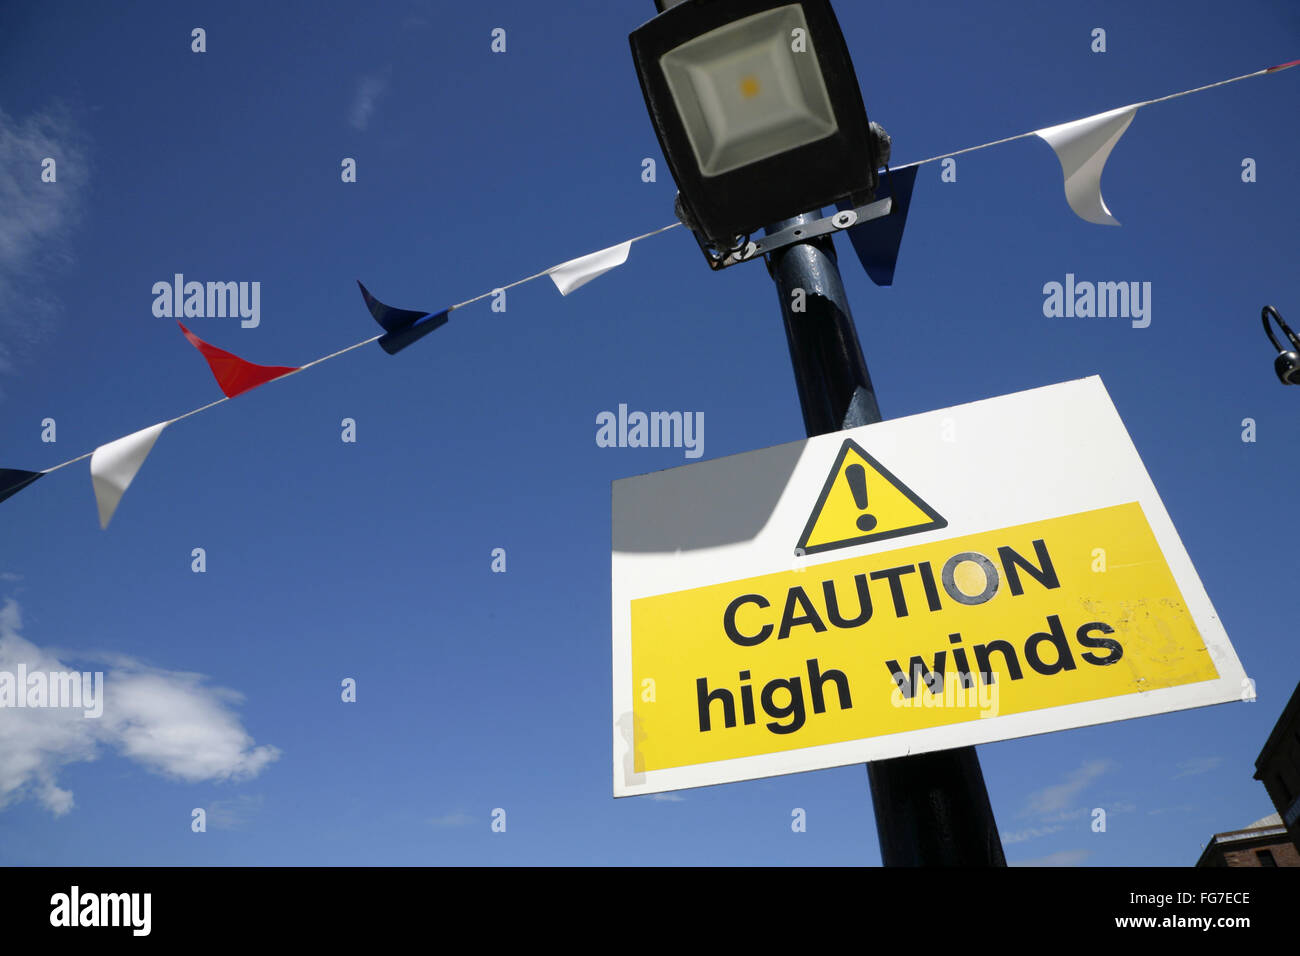 High winds warning sign. Stock Photo